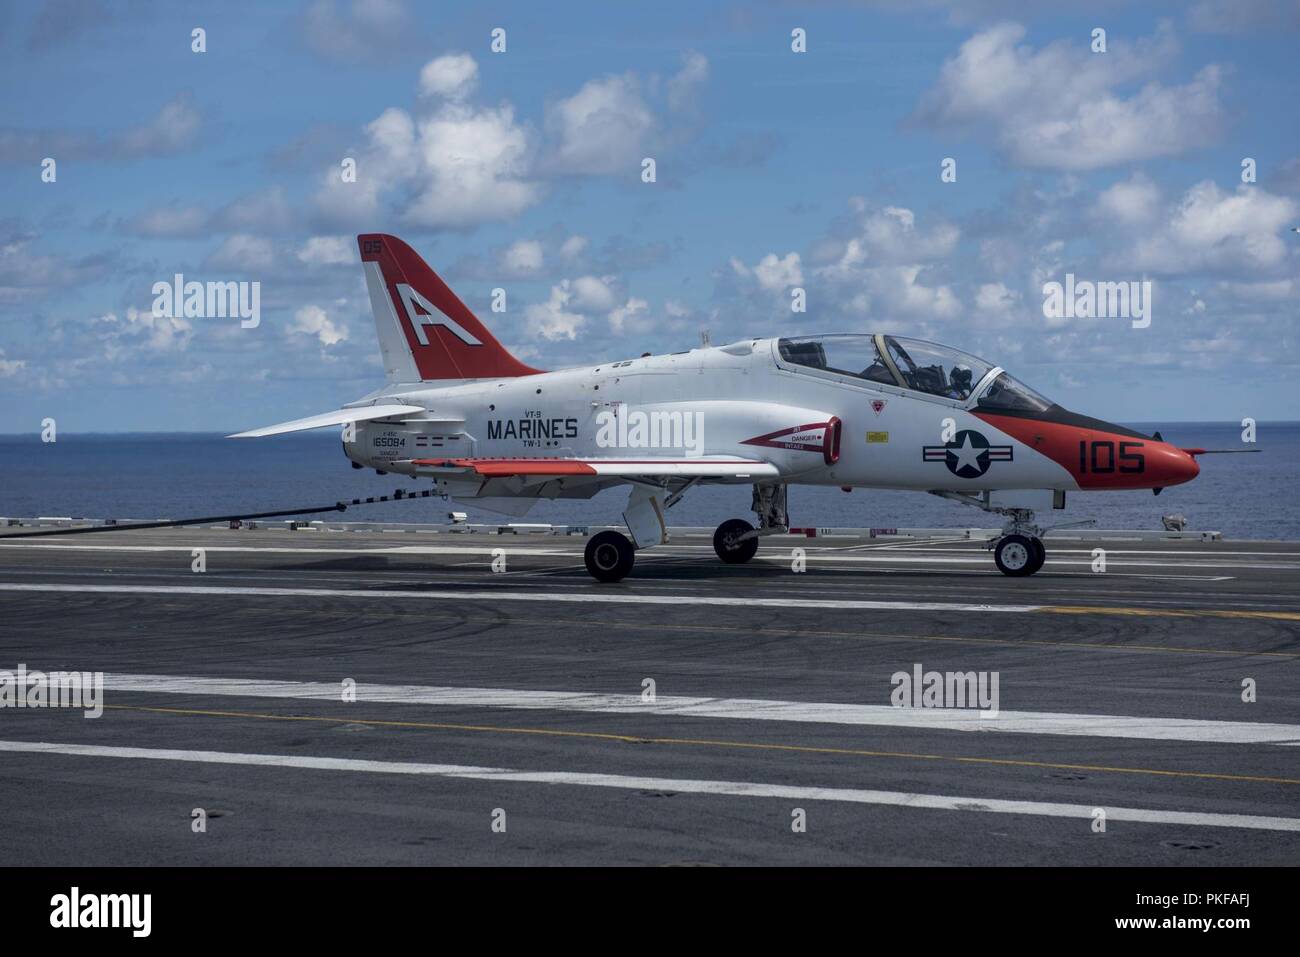 ATLANTIC OCEAN (Aug. 7, 2018) A T-45C Goshawk, attached to Training Air Wing 1, lands on the aircraft carrier USS George H.W. Bush (CVN 77). The ship is underway conducting routine training exercises to maintain carrier readiness. Stock Photo